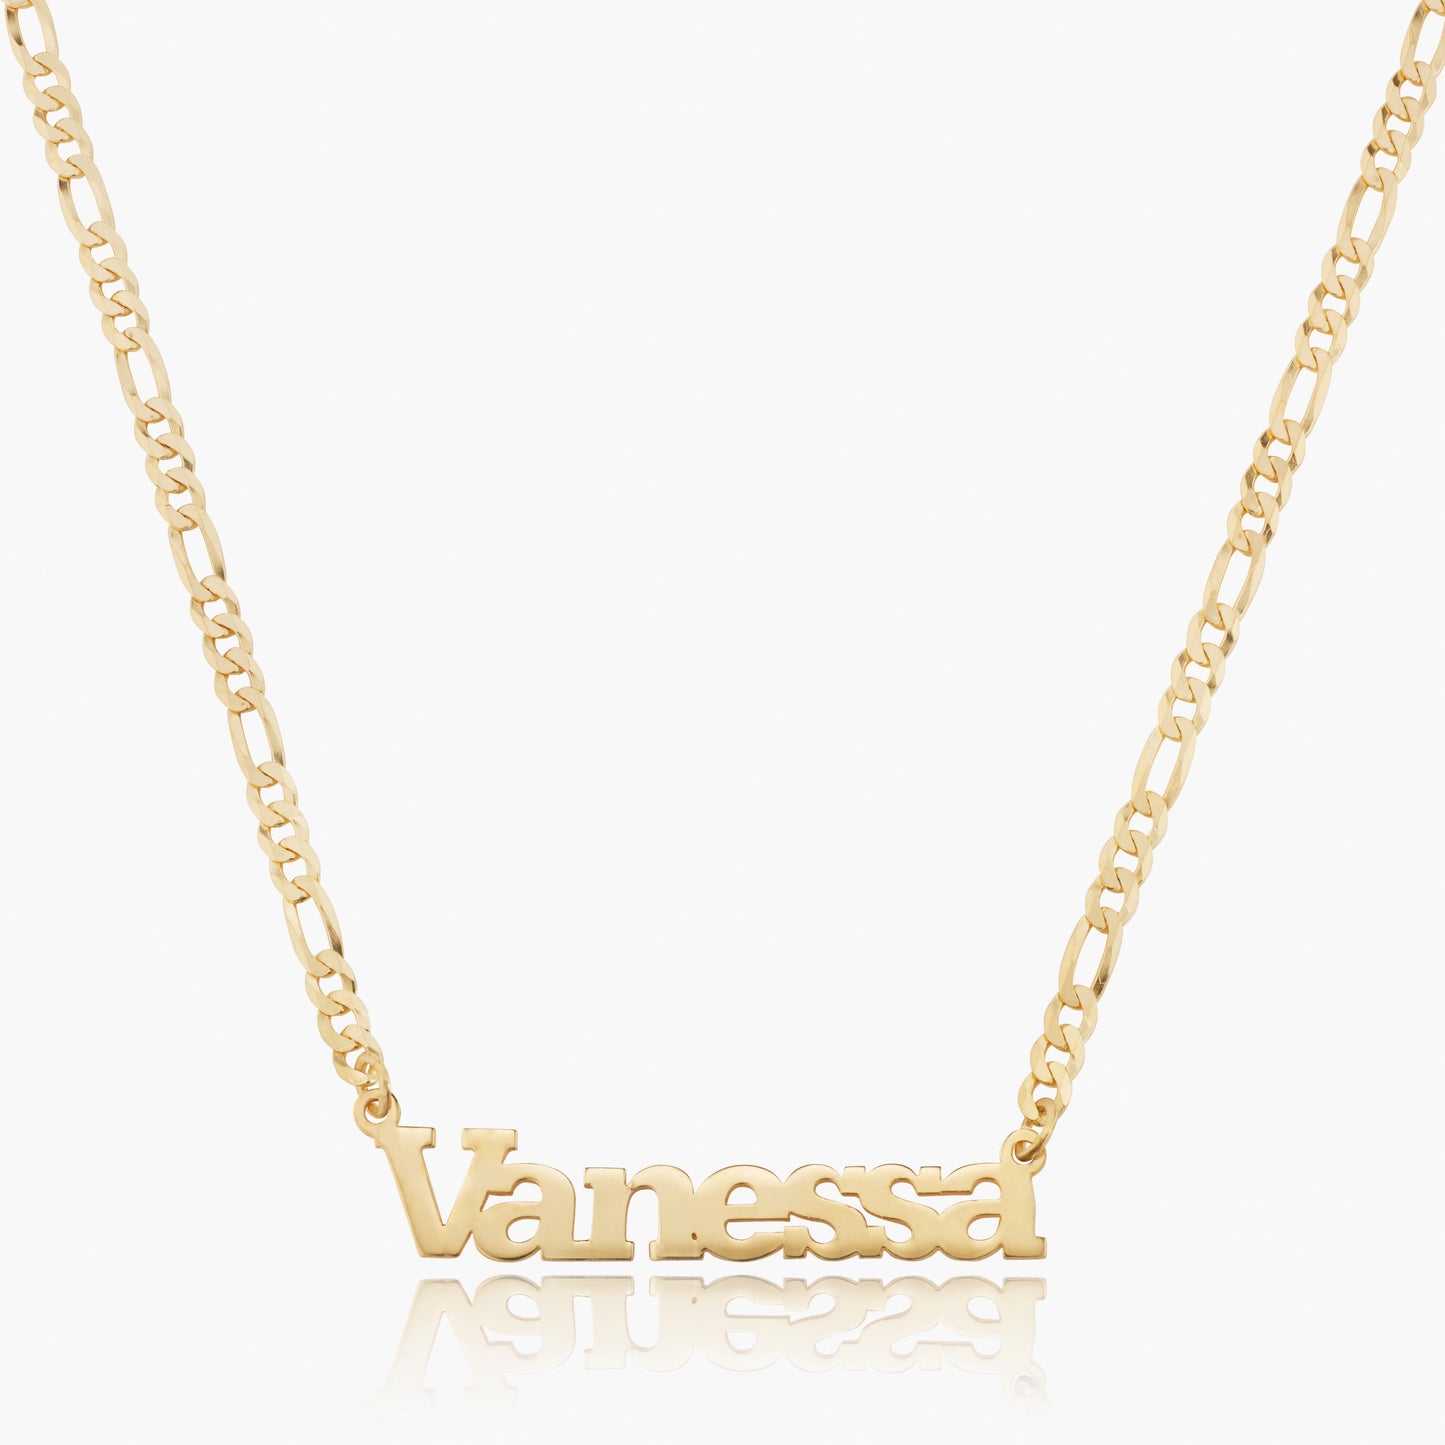 Kid's Times New Roman Name Necklace